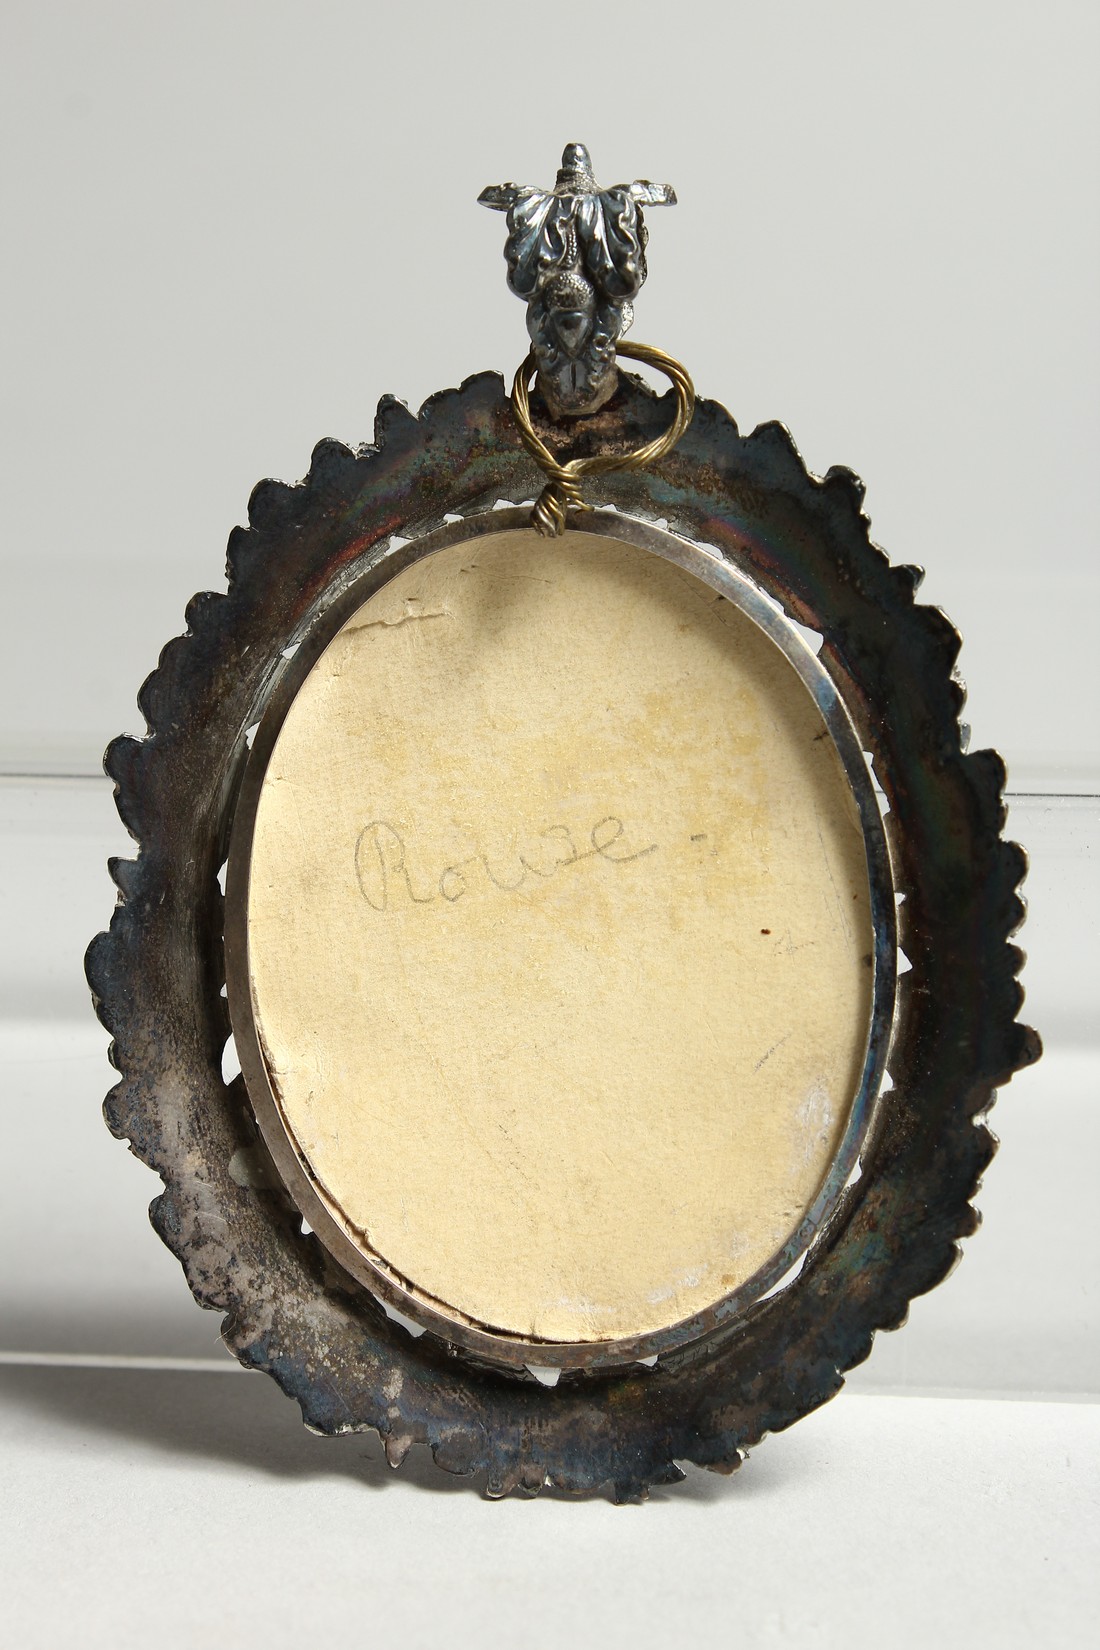 A GEORGIAN OVAL MINIATURE OF A YOUNG MAN, in a silver frame. 2.5ins x 2ins. - Image 3 of 3